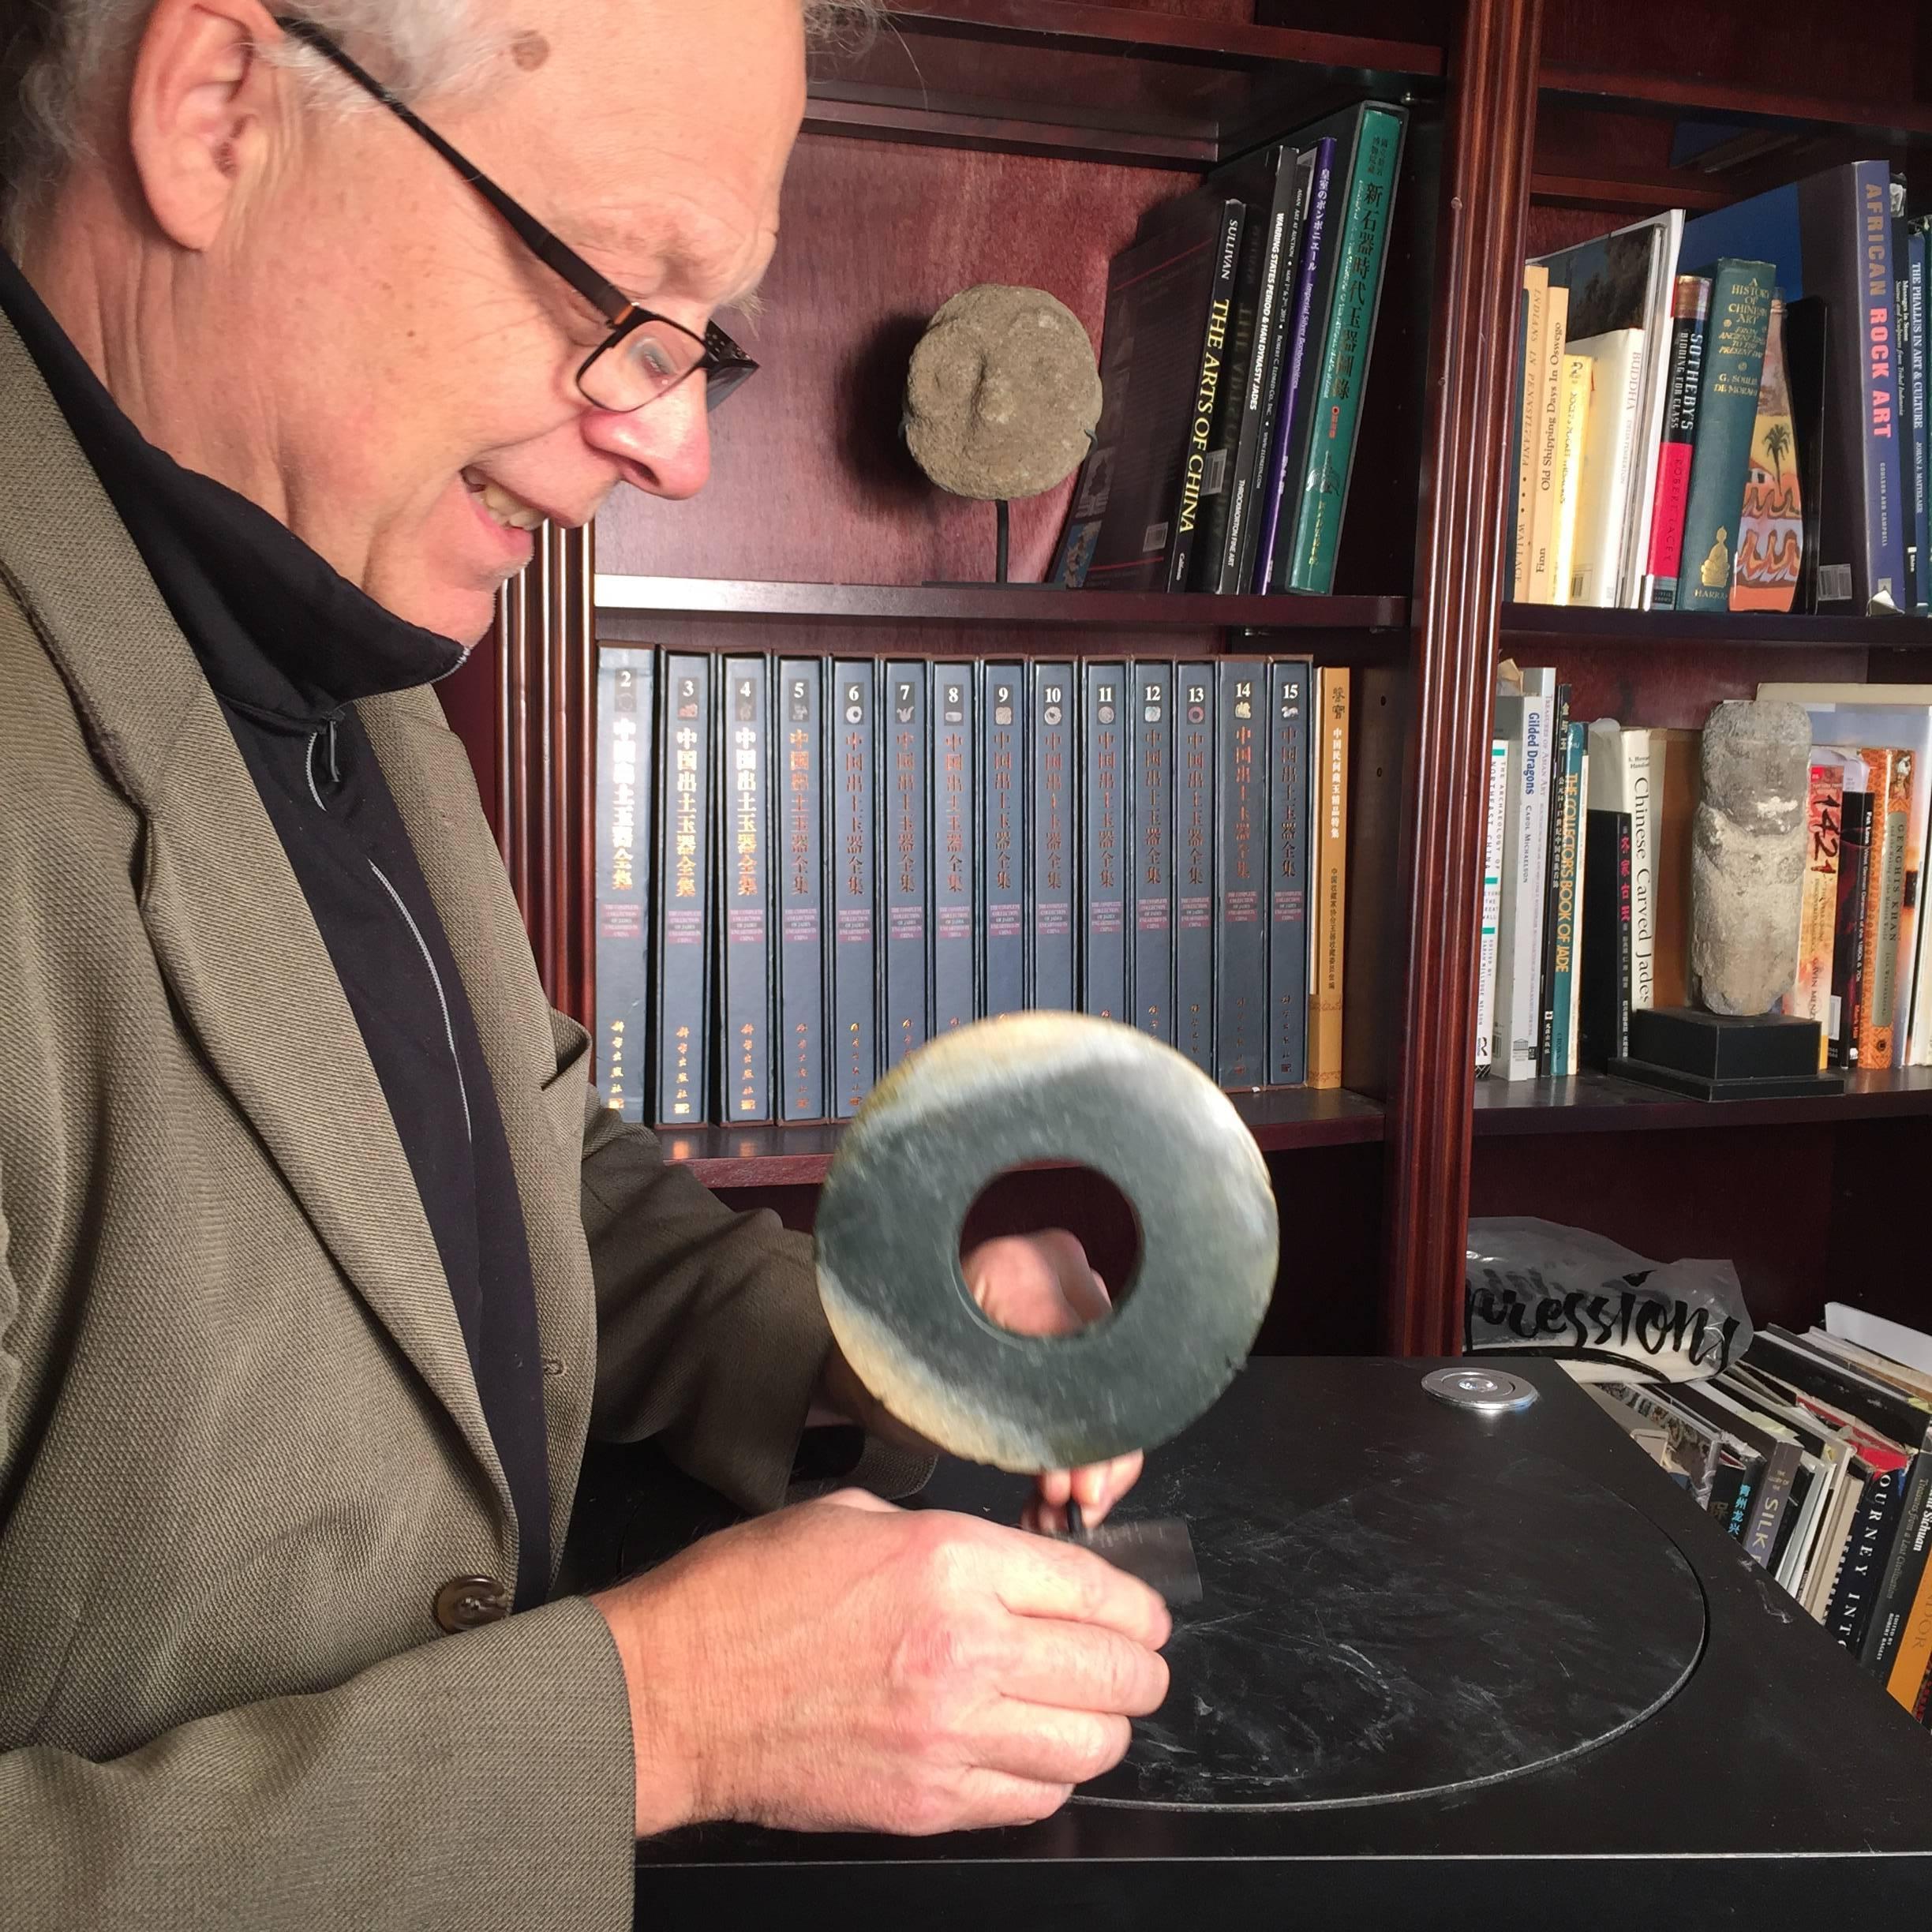 This is an authentic Chinese ancient jade bi disc from the Qi Jia Culture, Northwestern China, 3000-2000 BCE. This comes from our private collection. 

Dimensions: the bi disc is 5.75 inches diameter and 7.5 inches high with custom stand which is